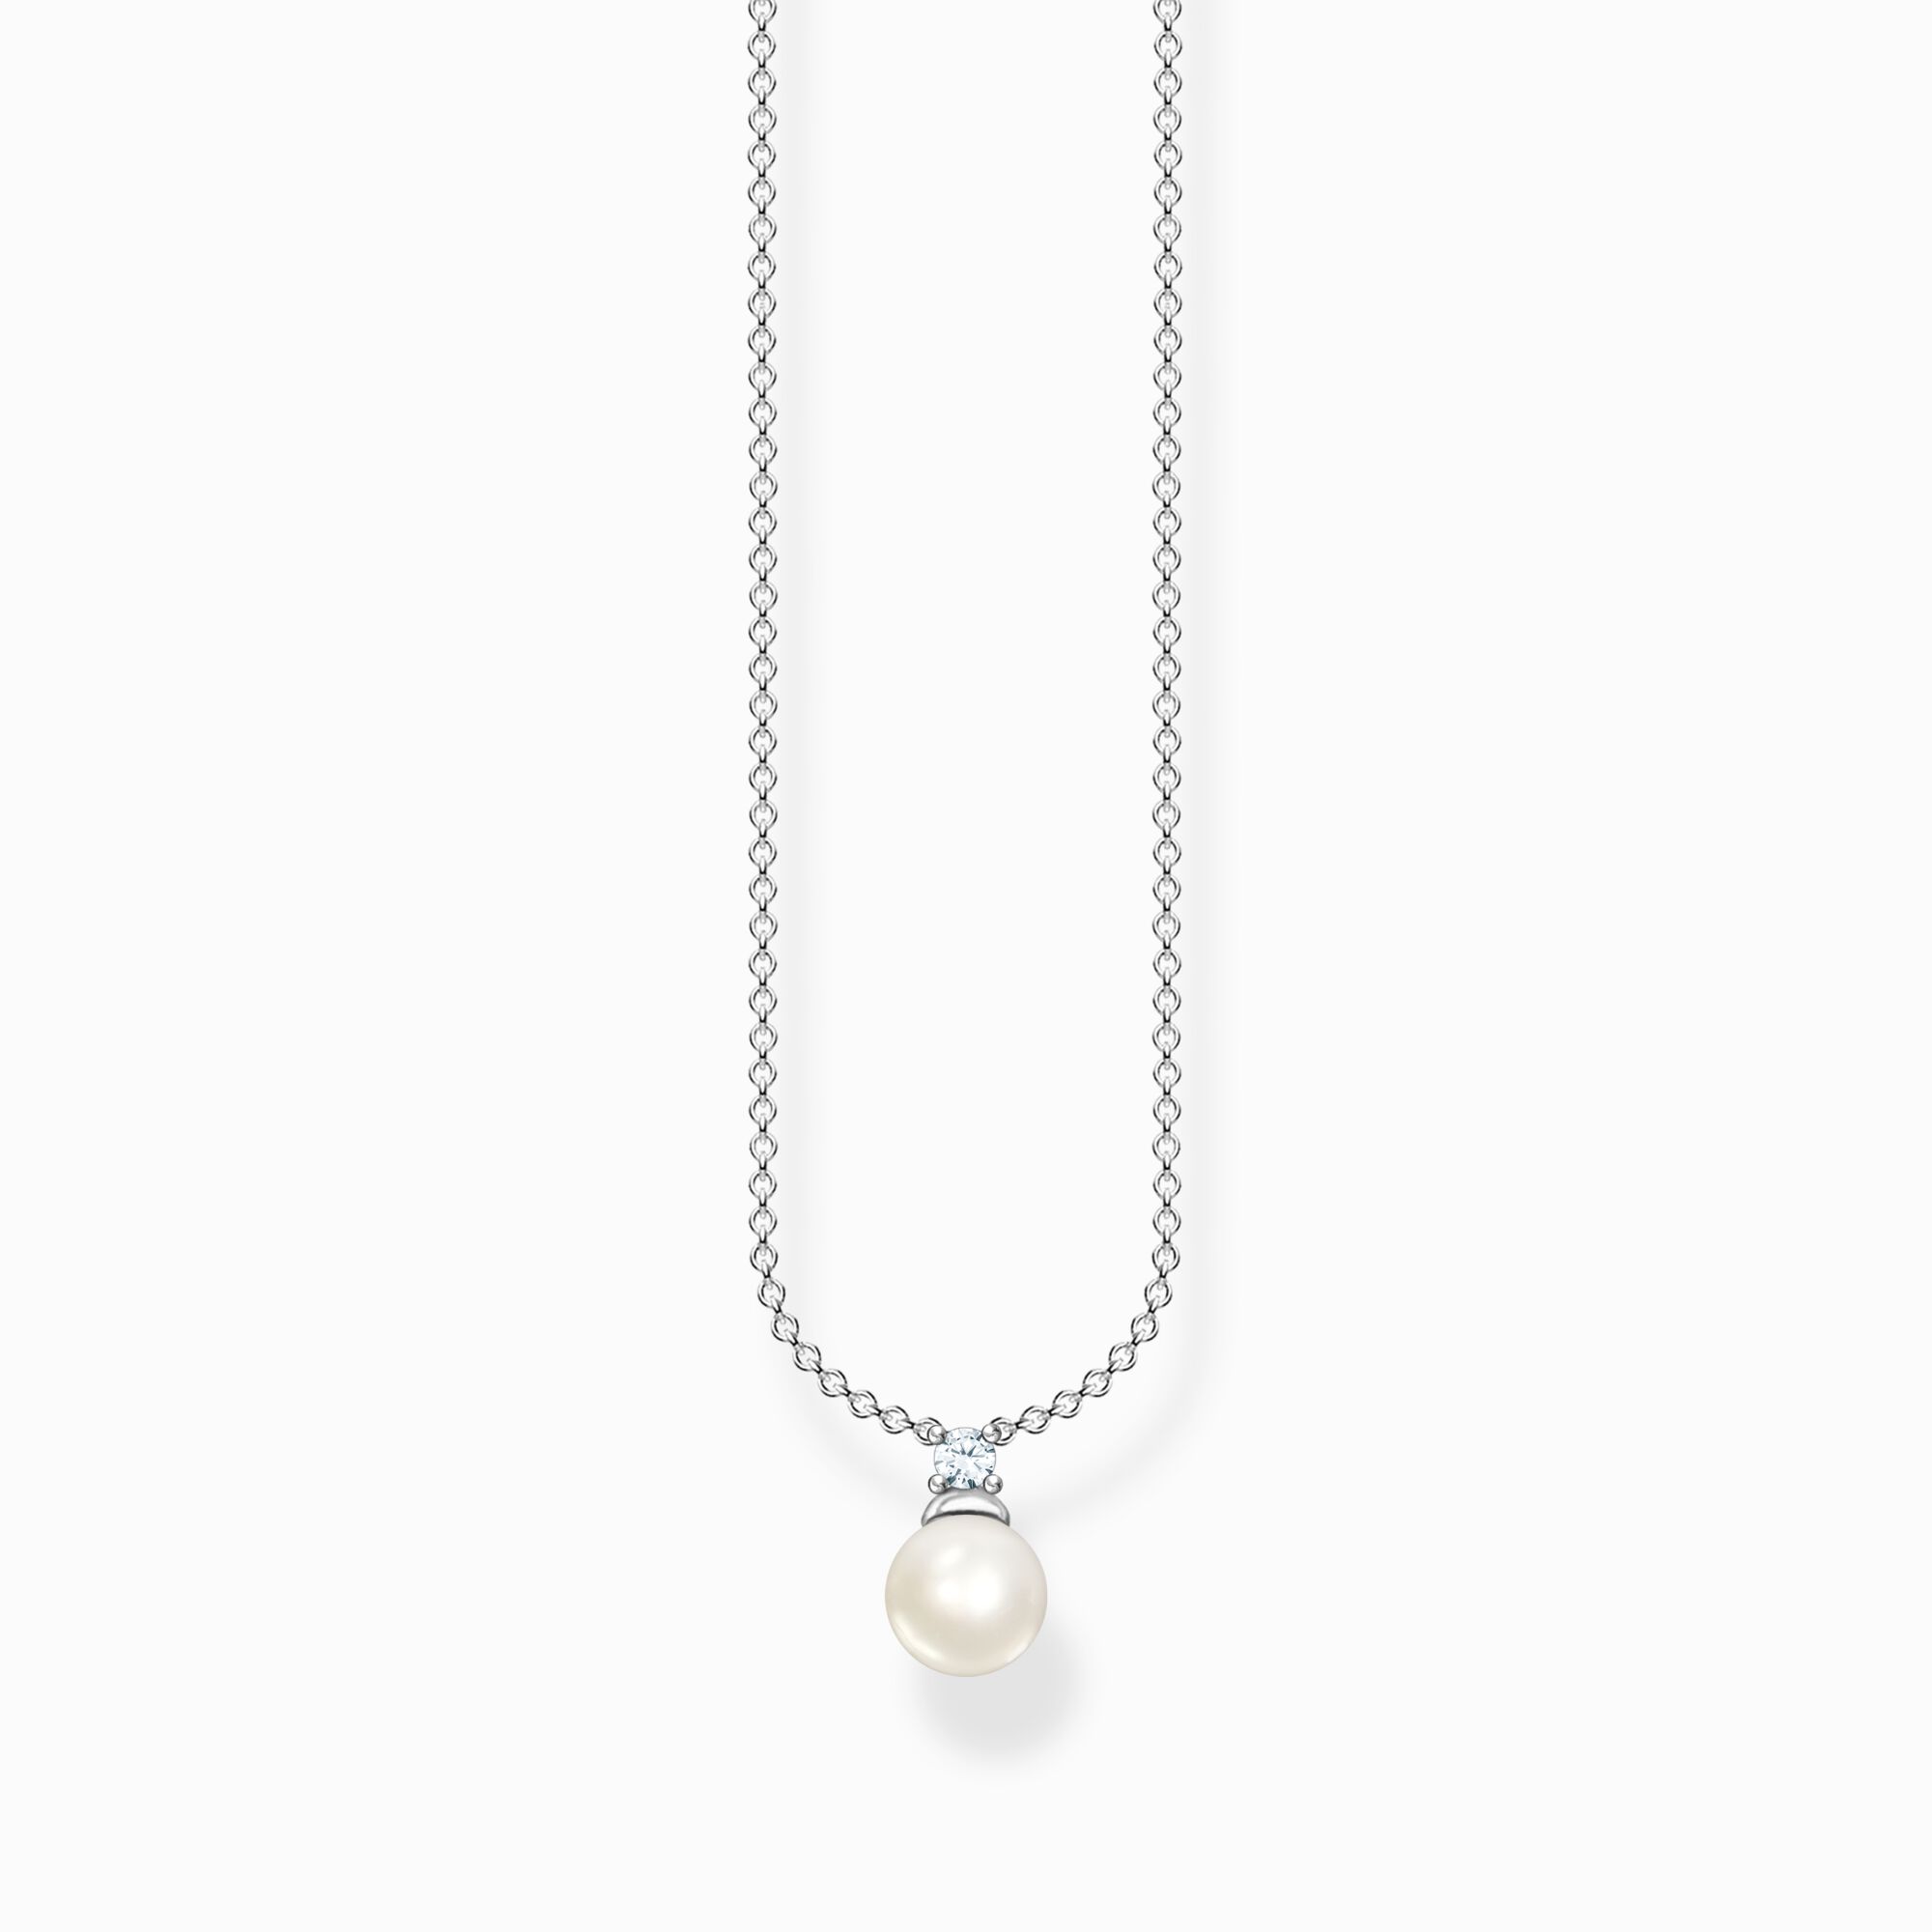 Silver necklace with pearl and zirconia stone | THOMAS SABO